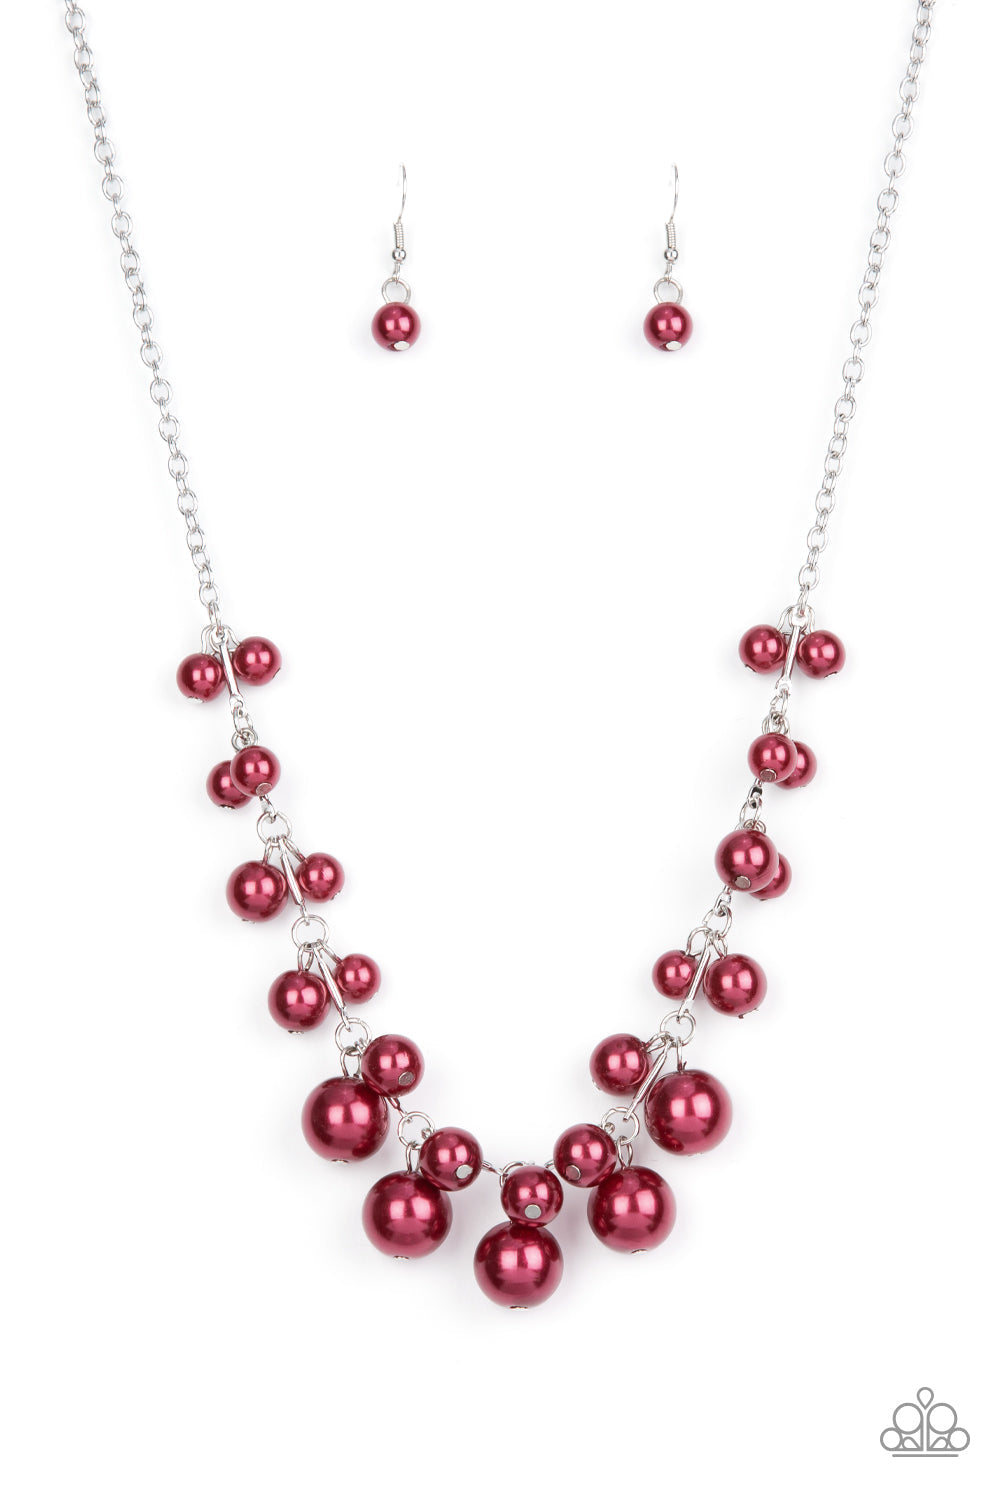 Tearoom Gossip - Red Pearl and Silver Necklace - Paparazzi Accessories - Gradually increasing in size, clusters of red pearls alternate with dainty silver bars below the collar, creating a bubbly fringe. Features an adjustable clasp closure. Sold as one individual necklace.